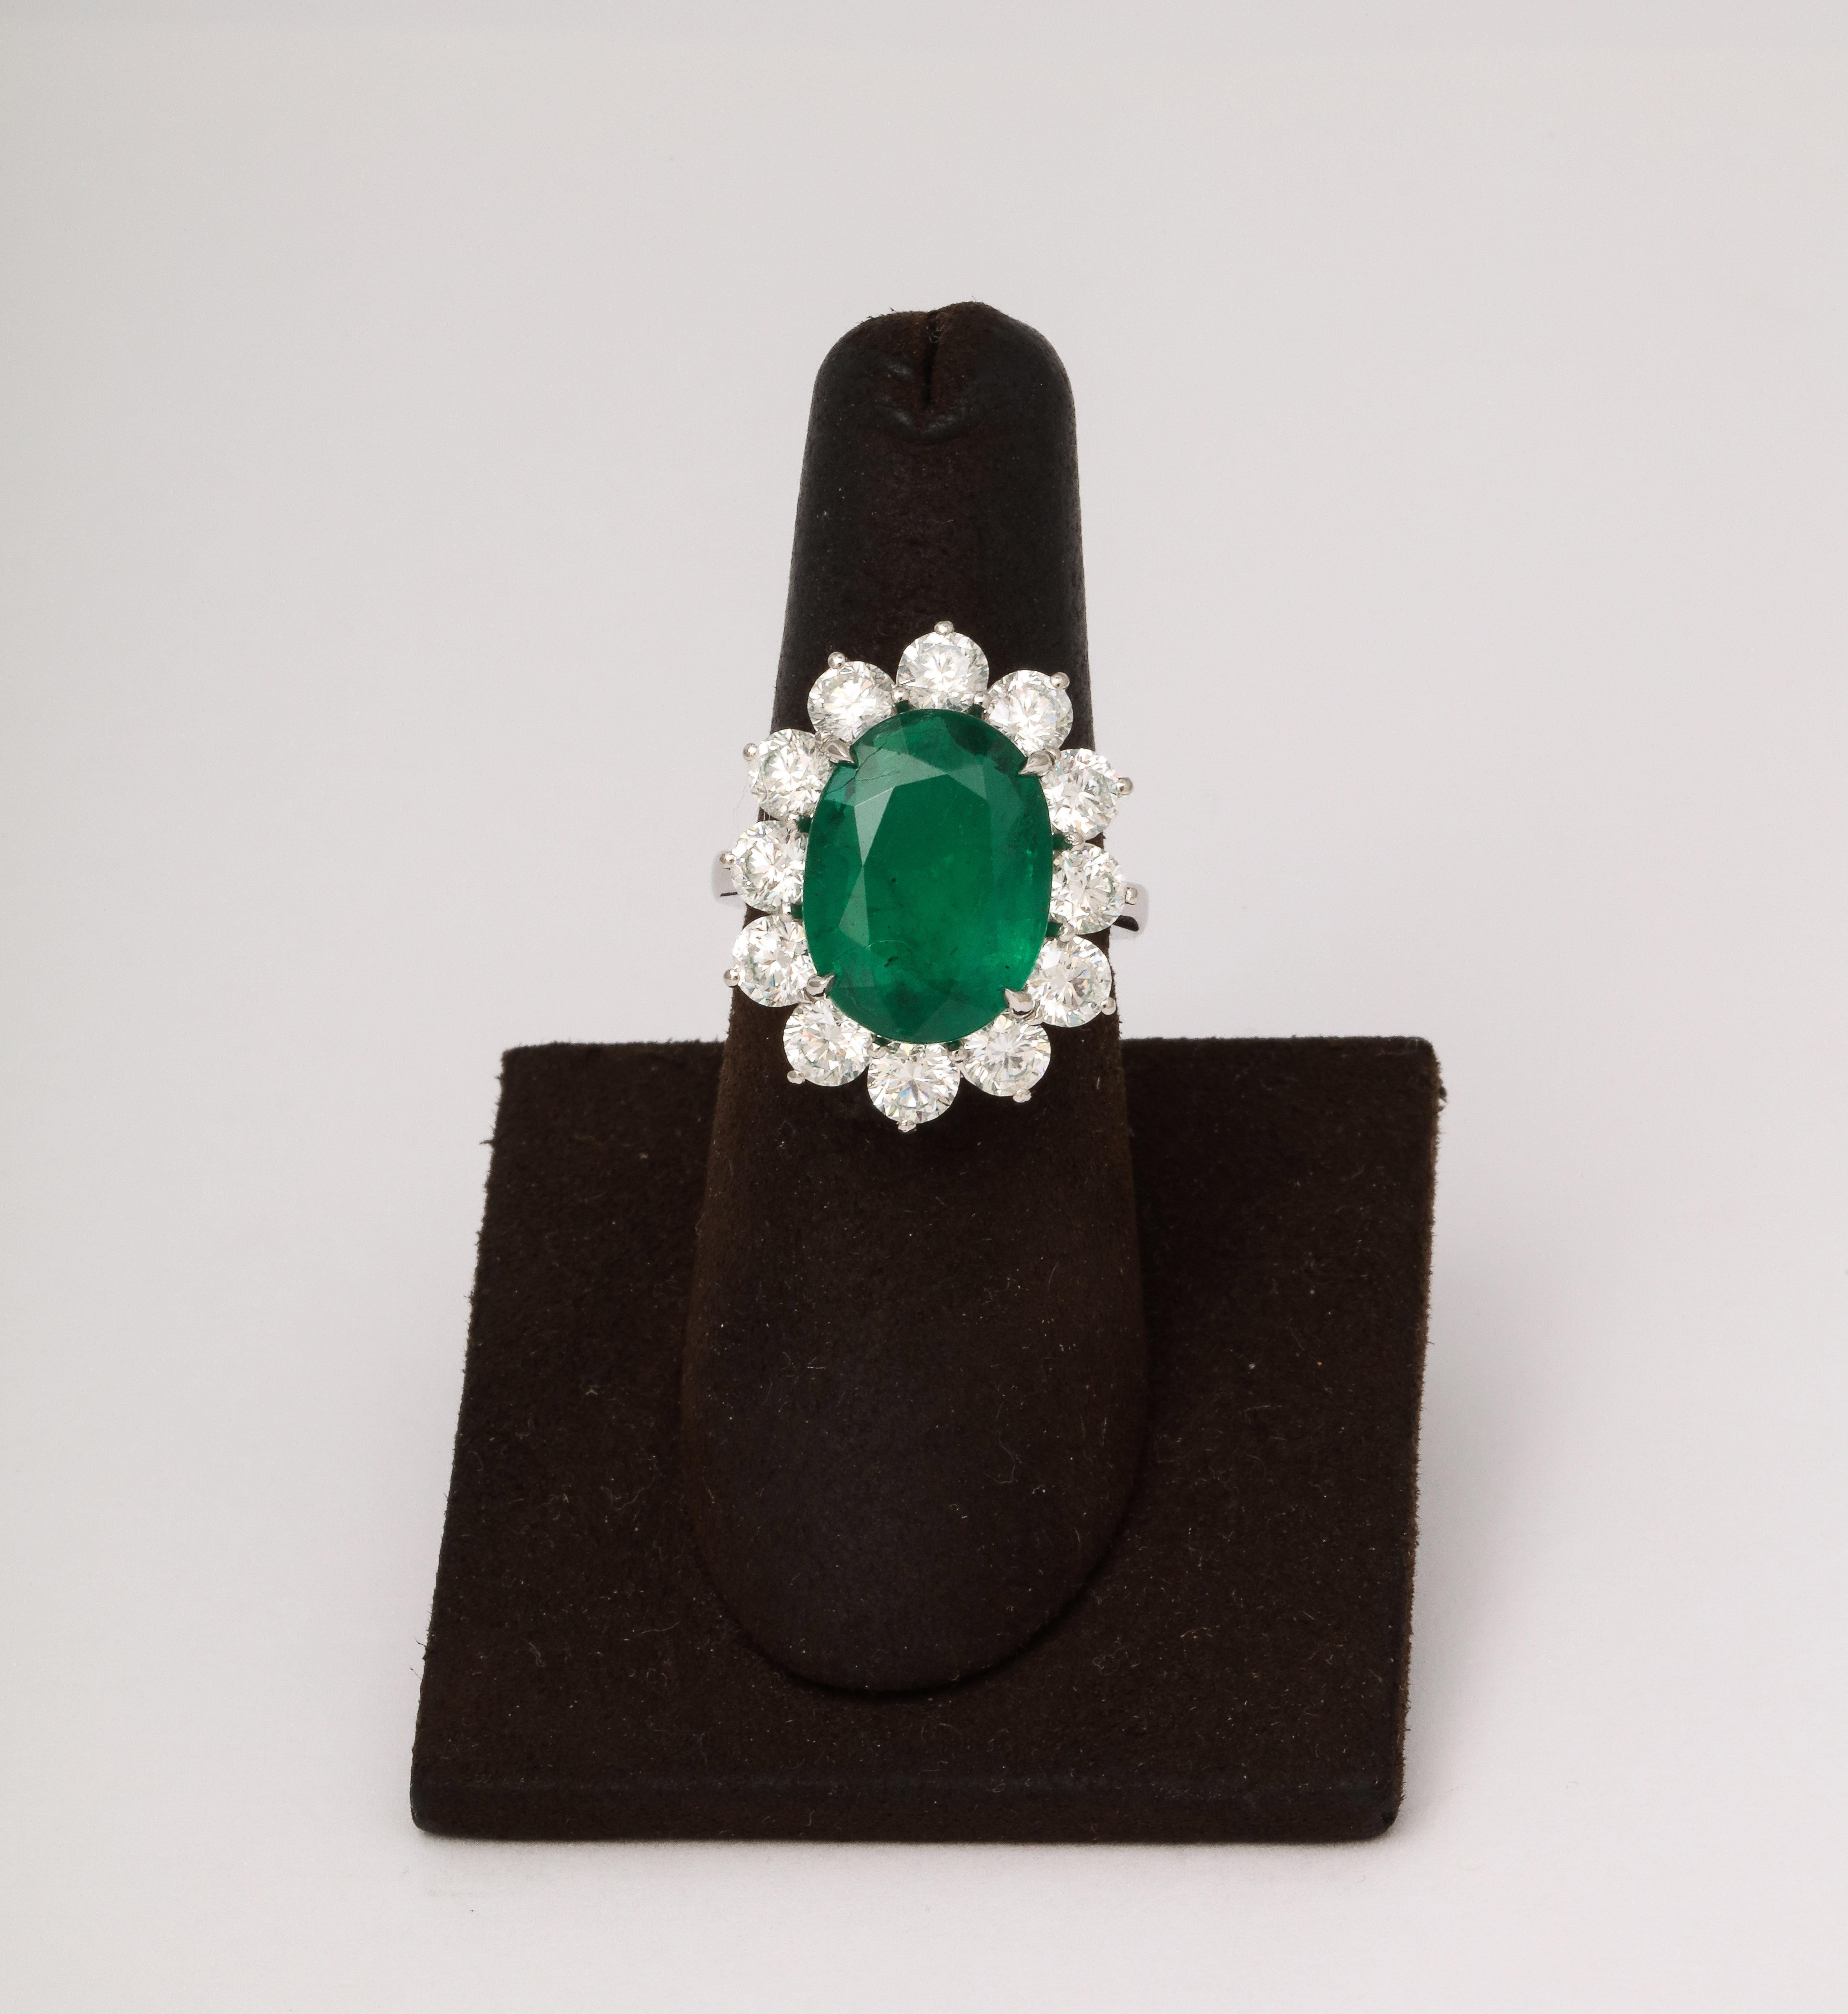 
A fabulous cocktail ring!

7.45 carat certified Intense Green oval emerald 

3.30 carats of round brilliant cut diamonds 

Set in platinum 

Size 6.25 - this ring can easily be resized to any finger size. 

Certified by Christian Dunaigre